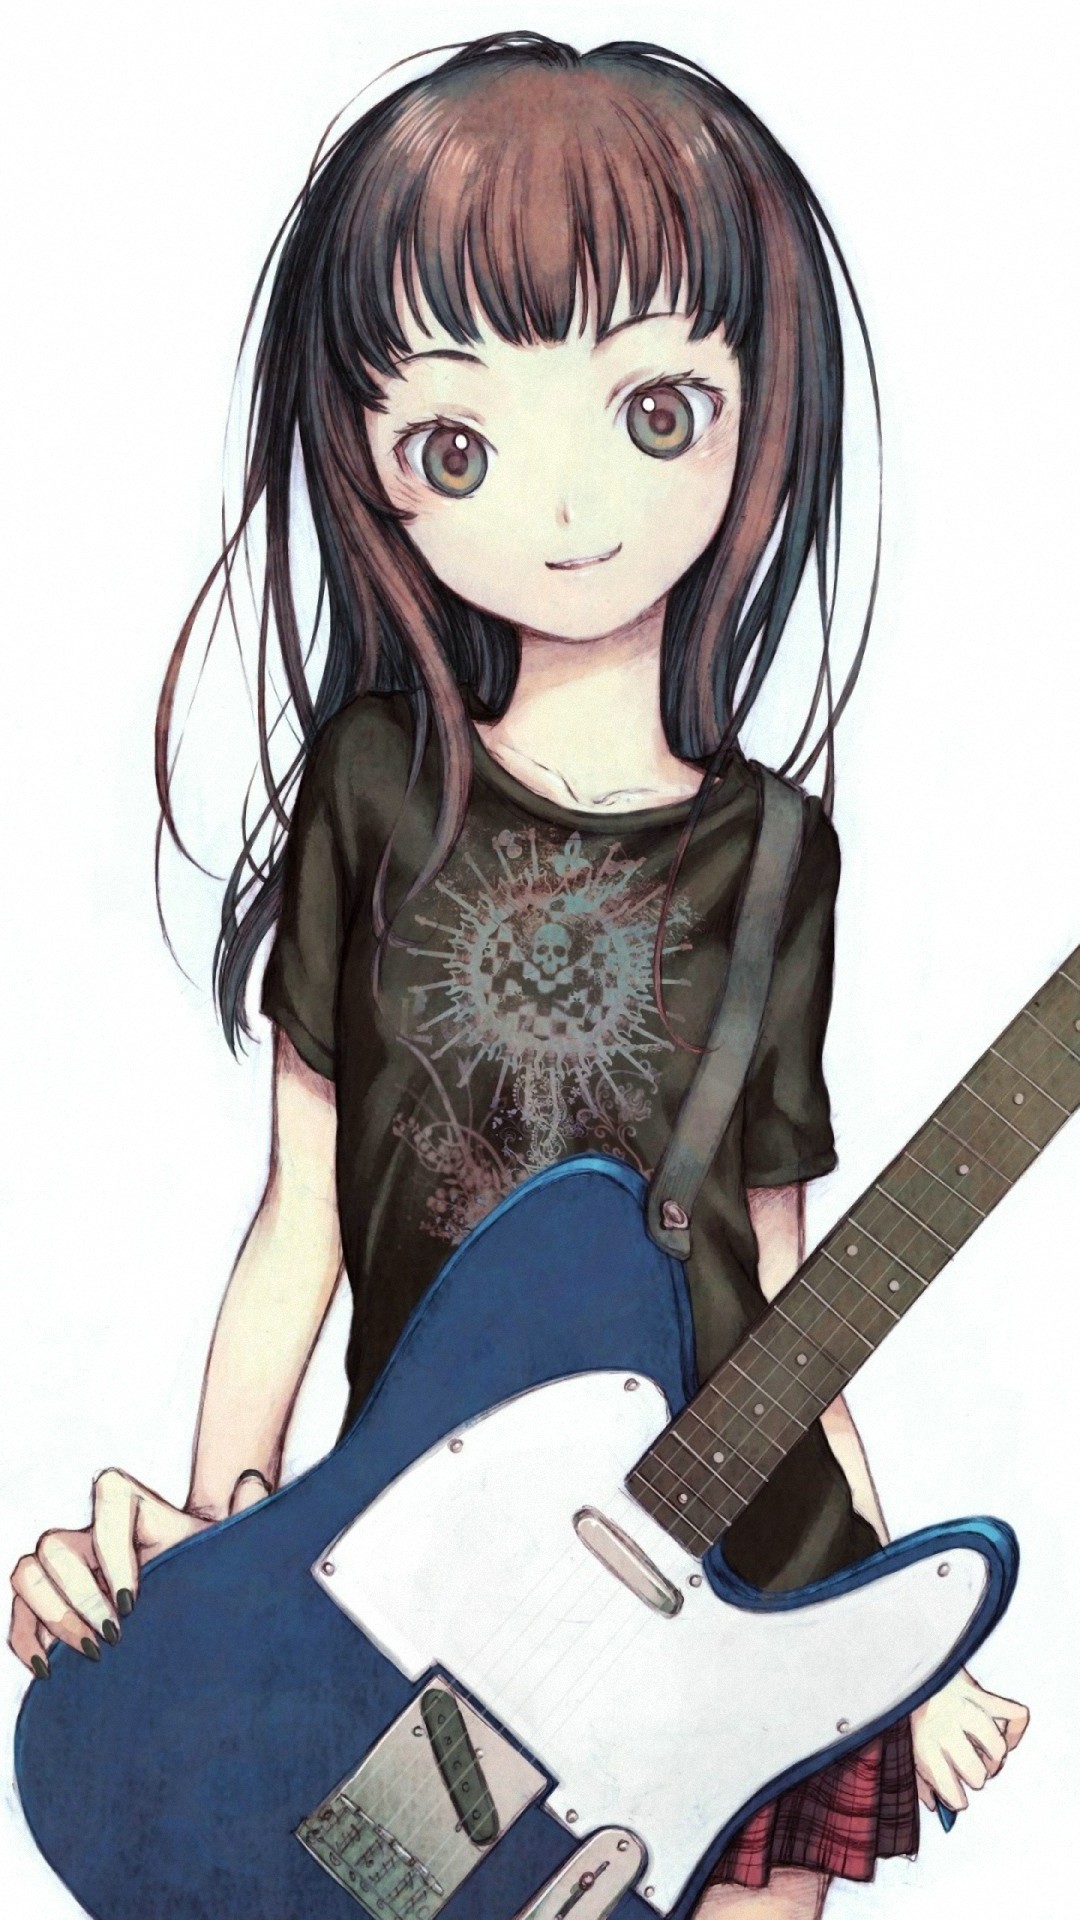 1080x1920  cute girl guitar iPhone 6 wallpapers HD - 6 Plus backgrounds